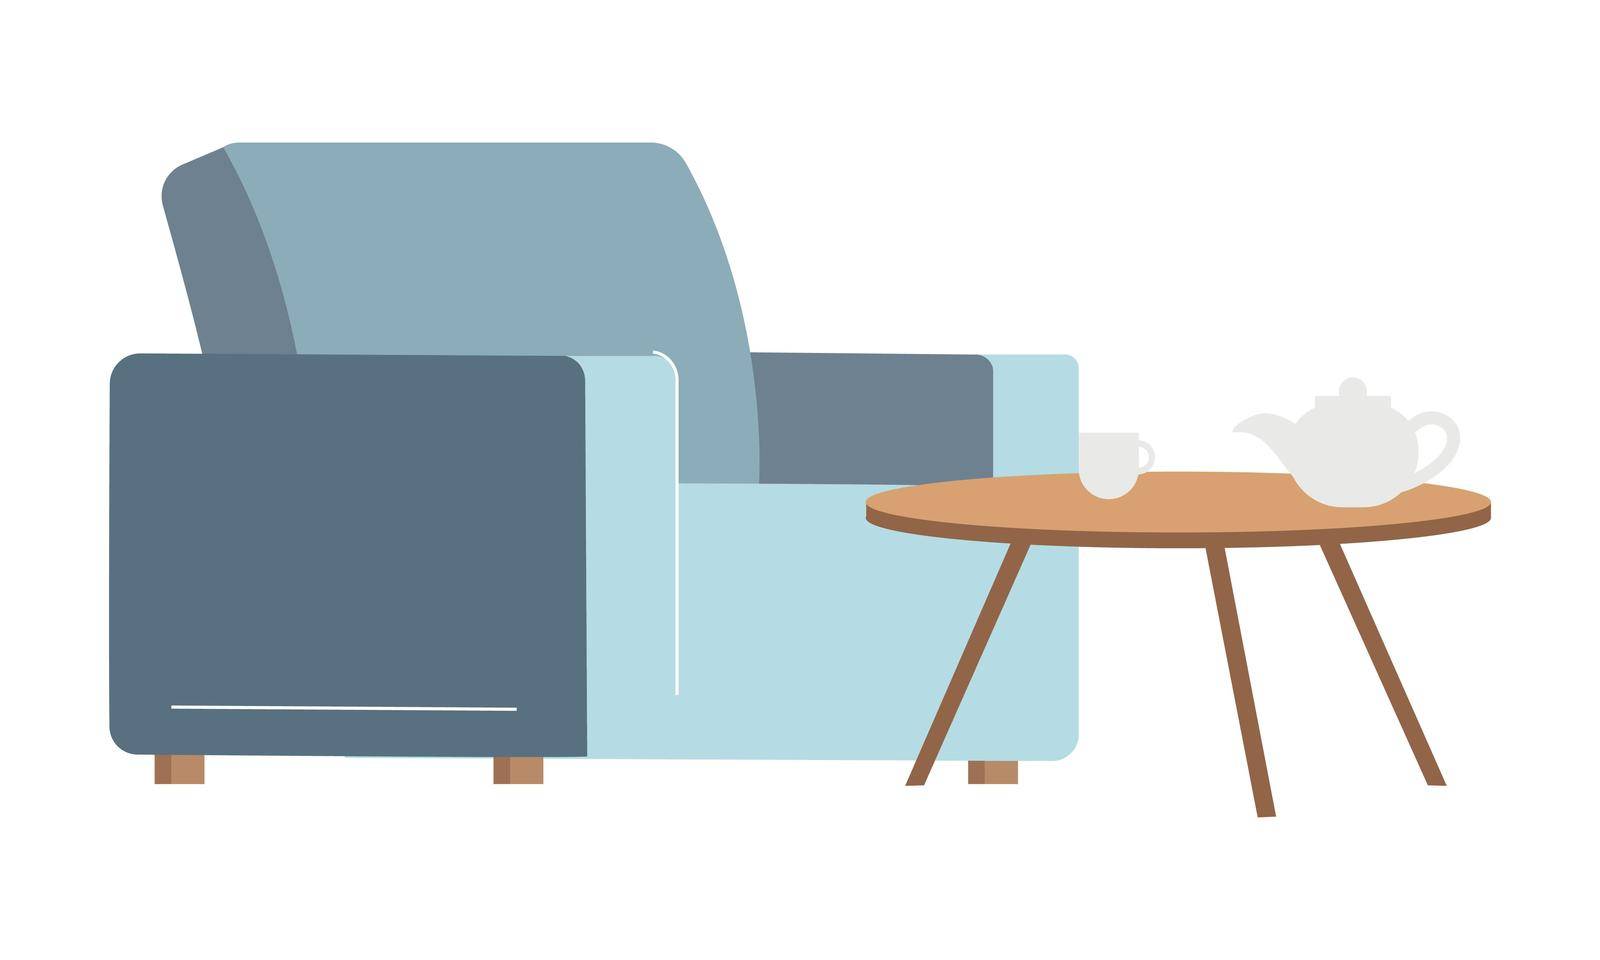 Armchair and wooden coffee table semi flat color vector object. Full sized item on white. Furniture for living room simple cartoon style illustration for web graphic design and animation